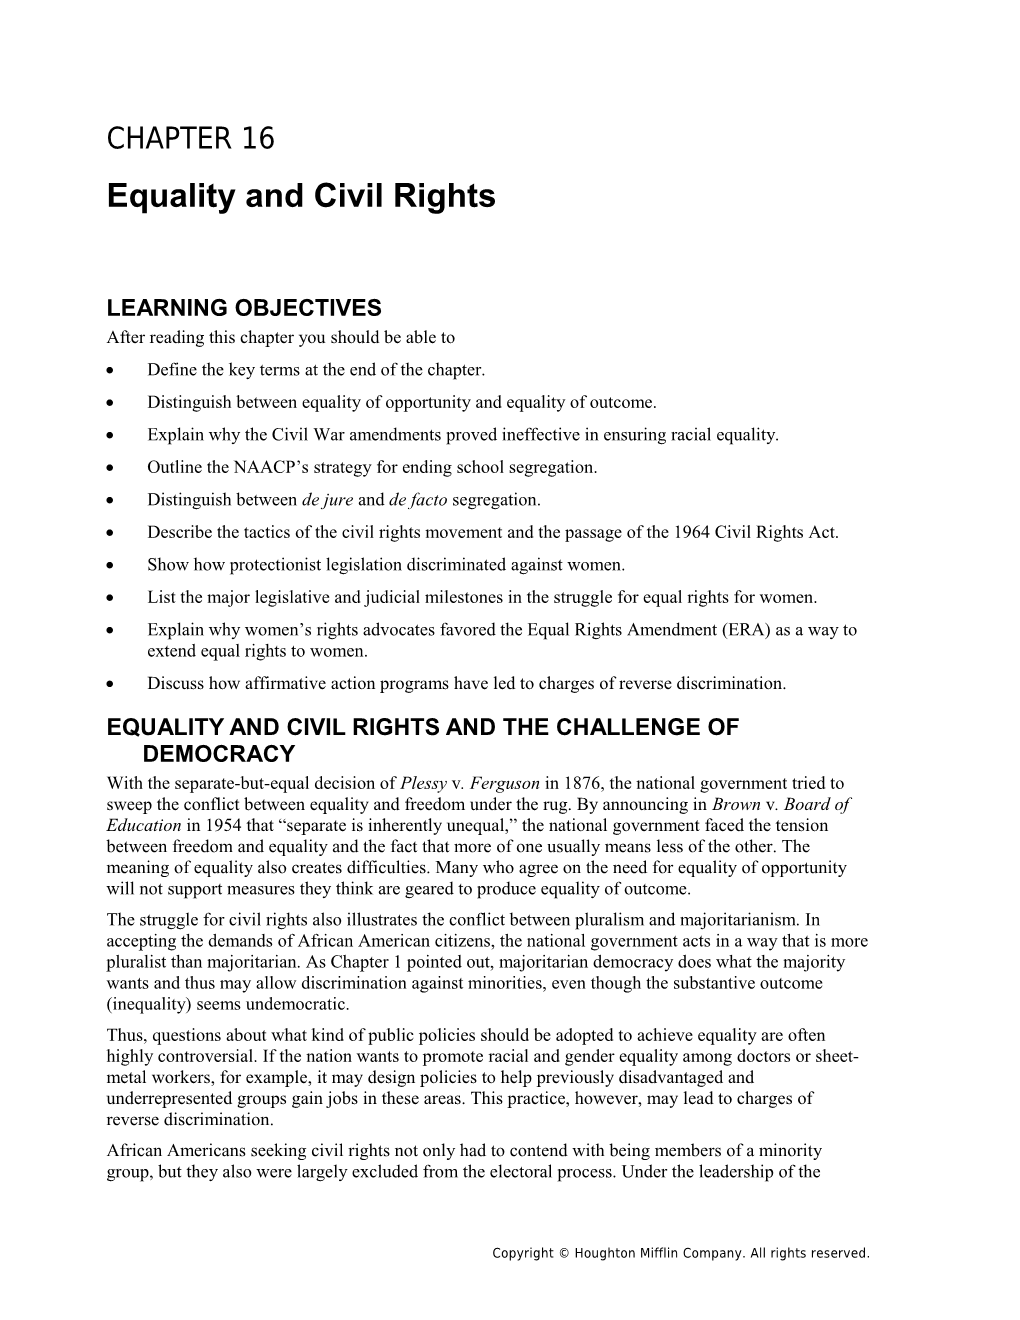 Chapter 16: Equality and Civil Rights 161